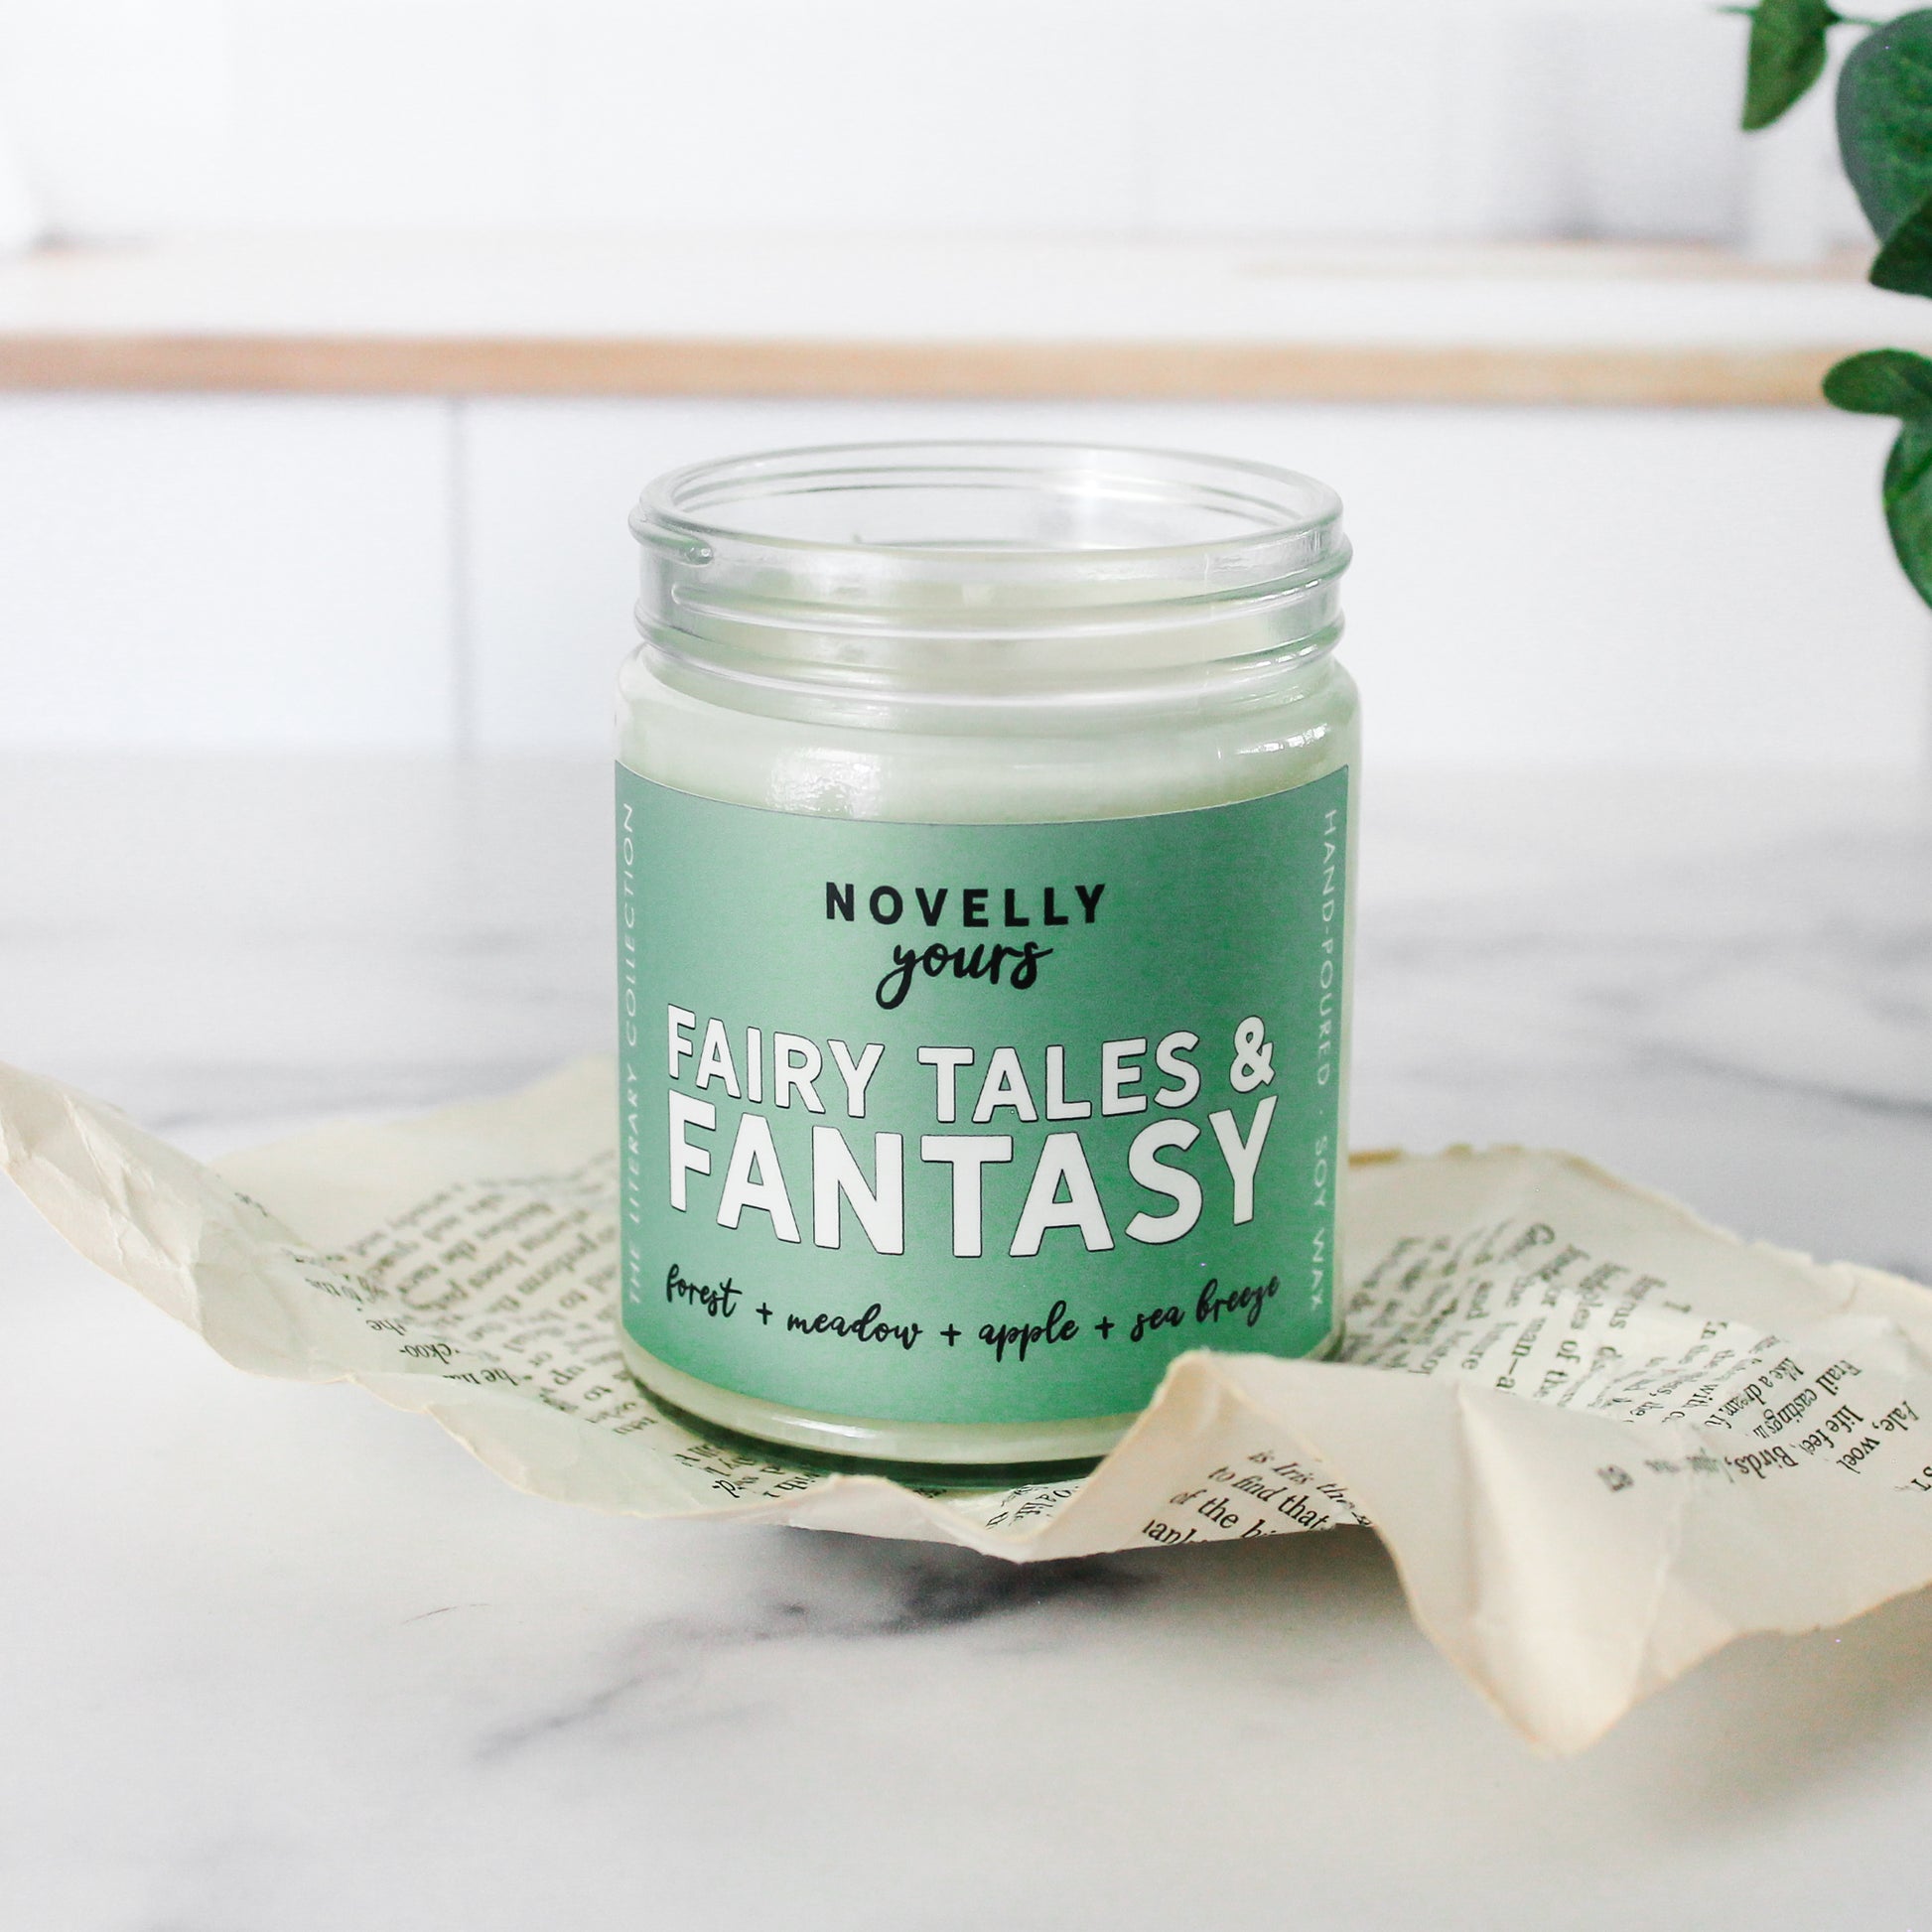 fairy tales & fantasy bookish candle with a green label and clear glass jar